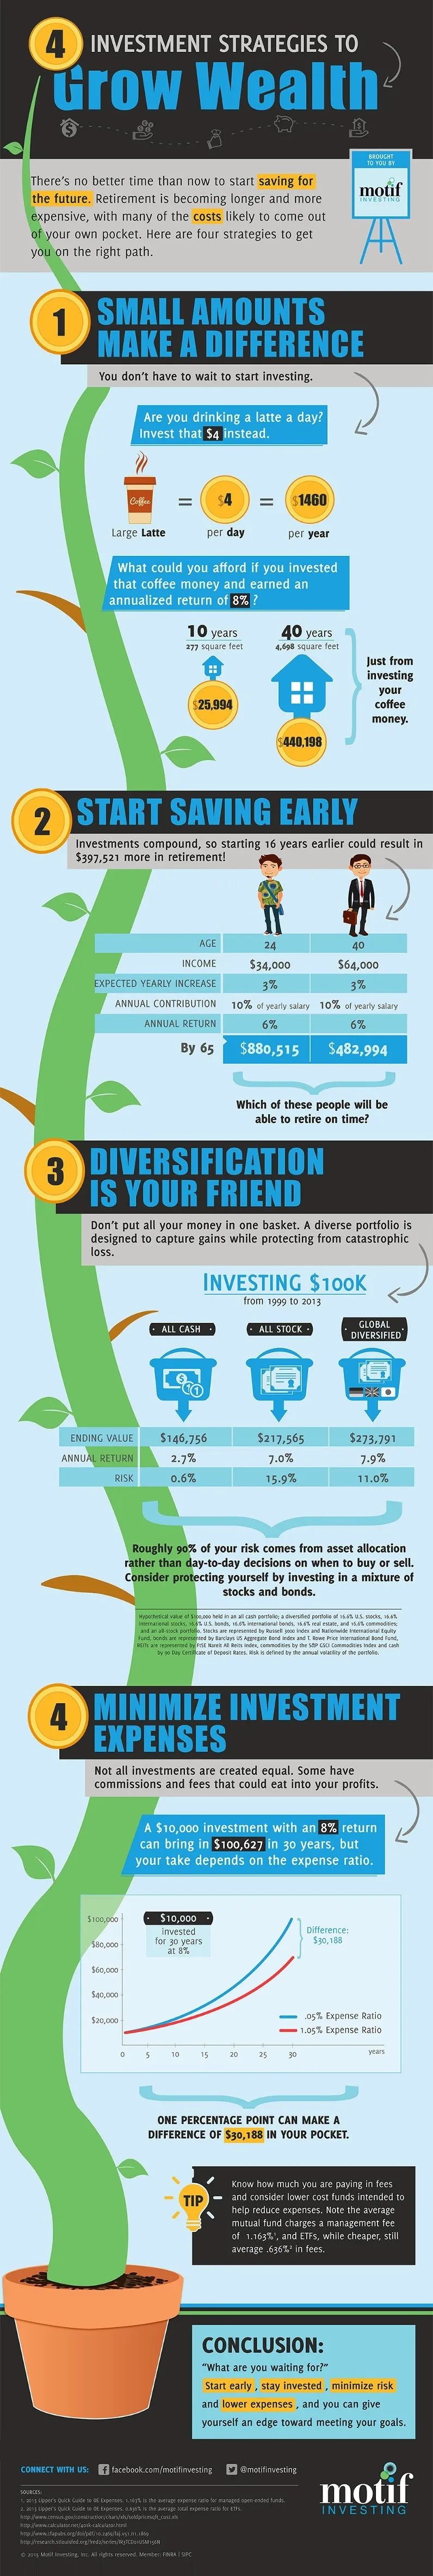 With Investing, Little Things Make a Big Difference The difference between good and great is often found in the details. As discussed in this infographic, a few little ideas can make a big difference in the long run.